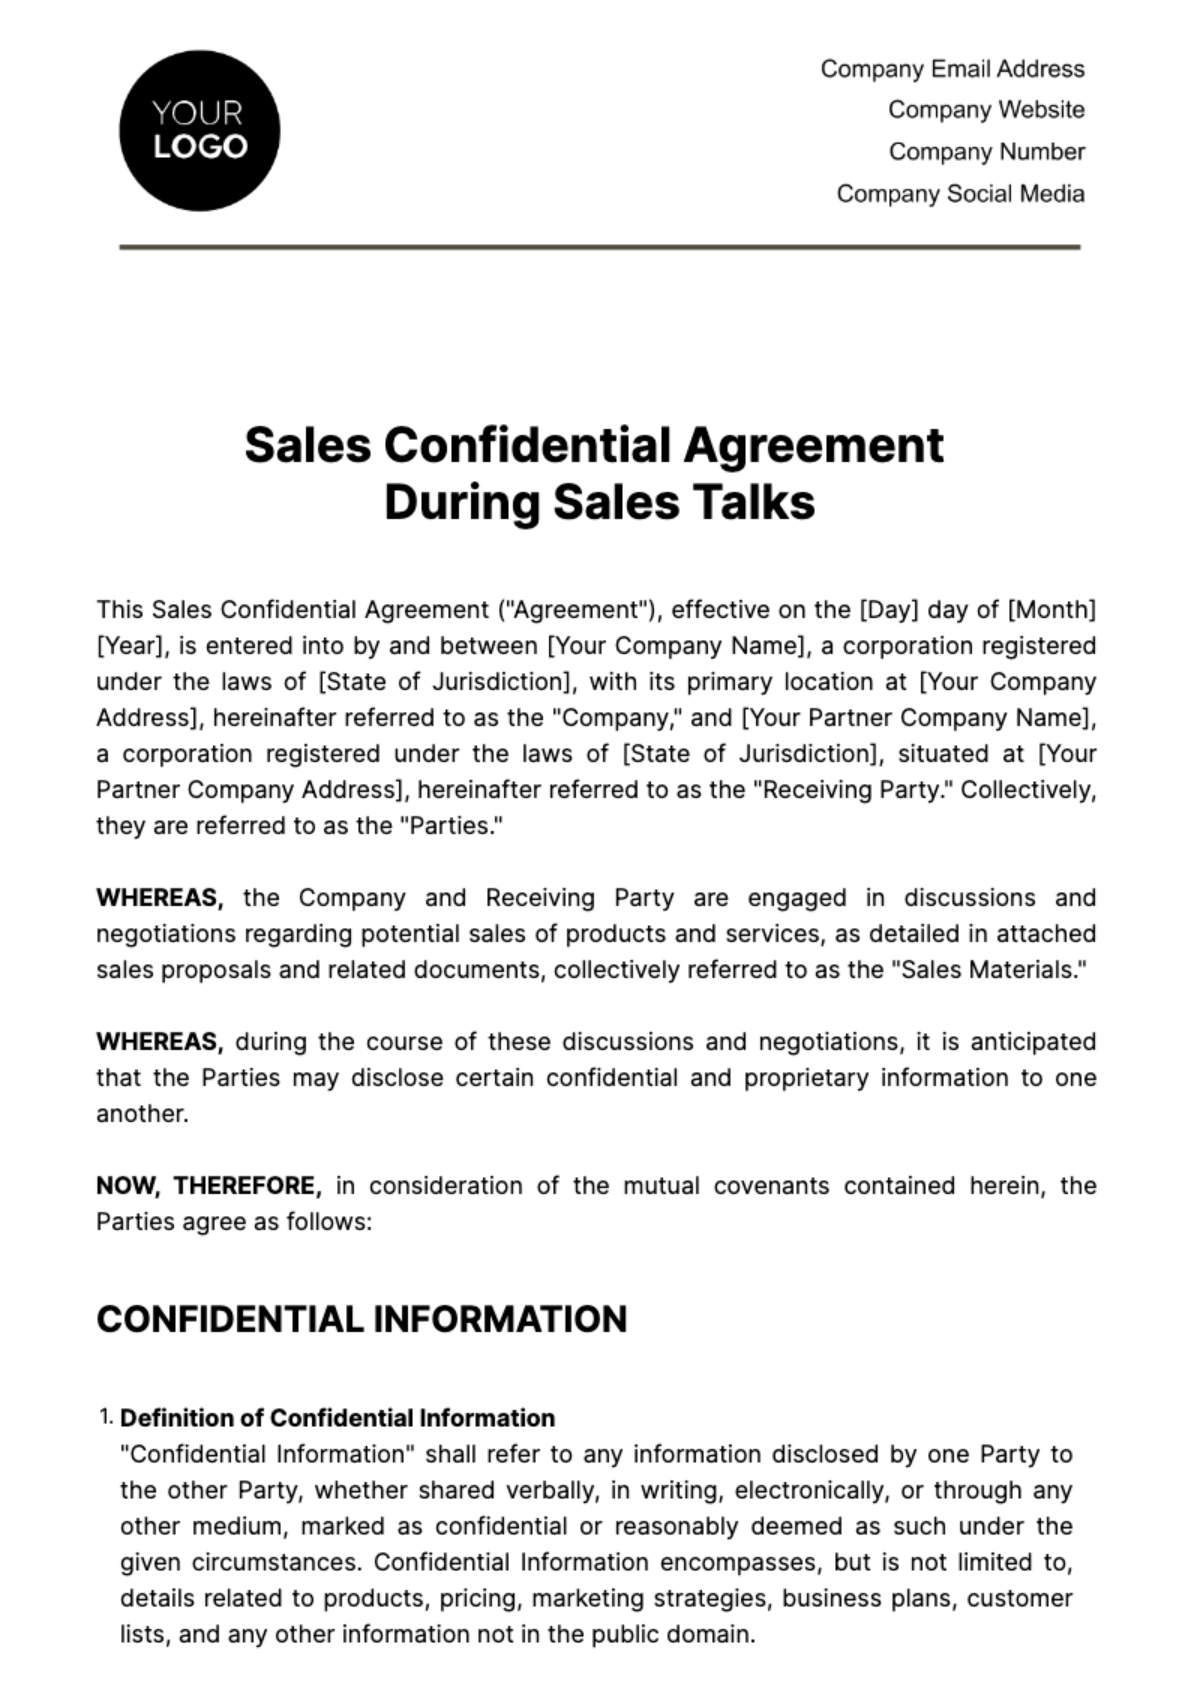 Free Sales Confidential Agreement during Sales Talks Template